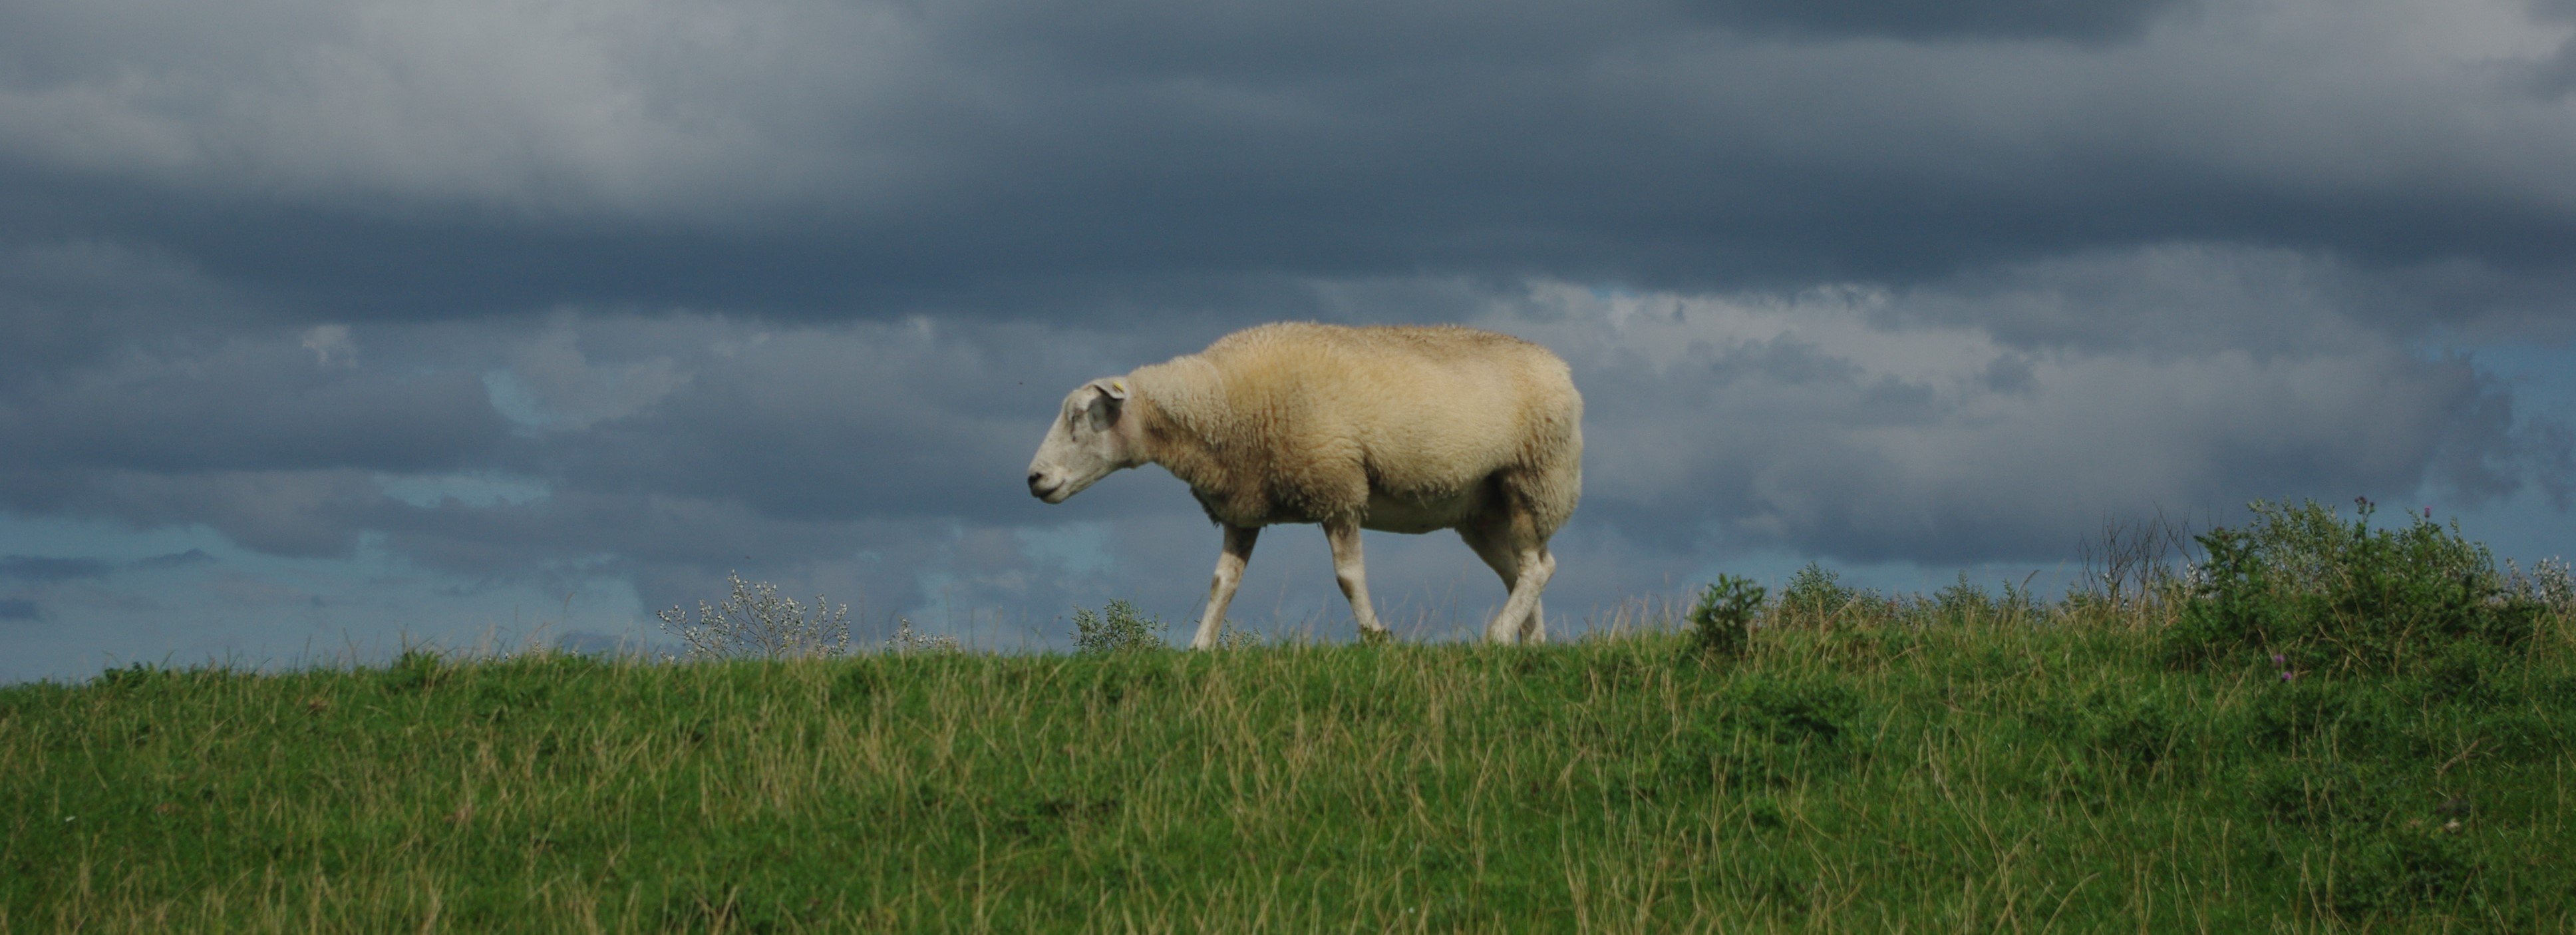 Sheep in the North German Plain